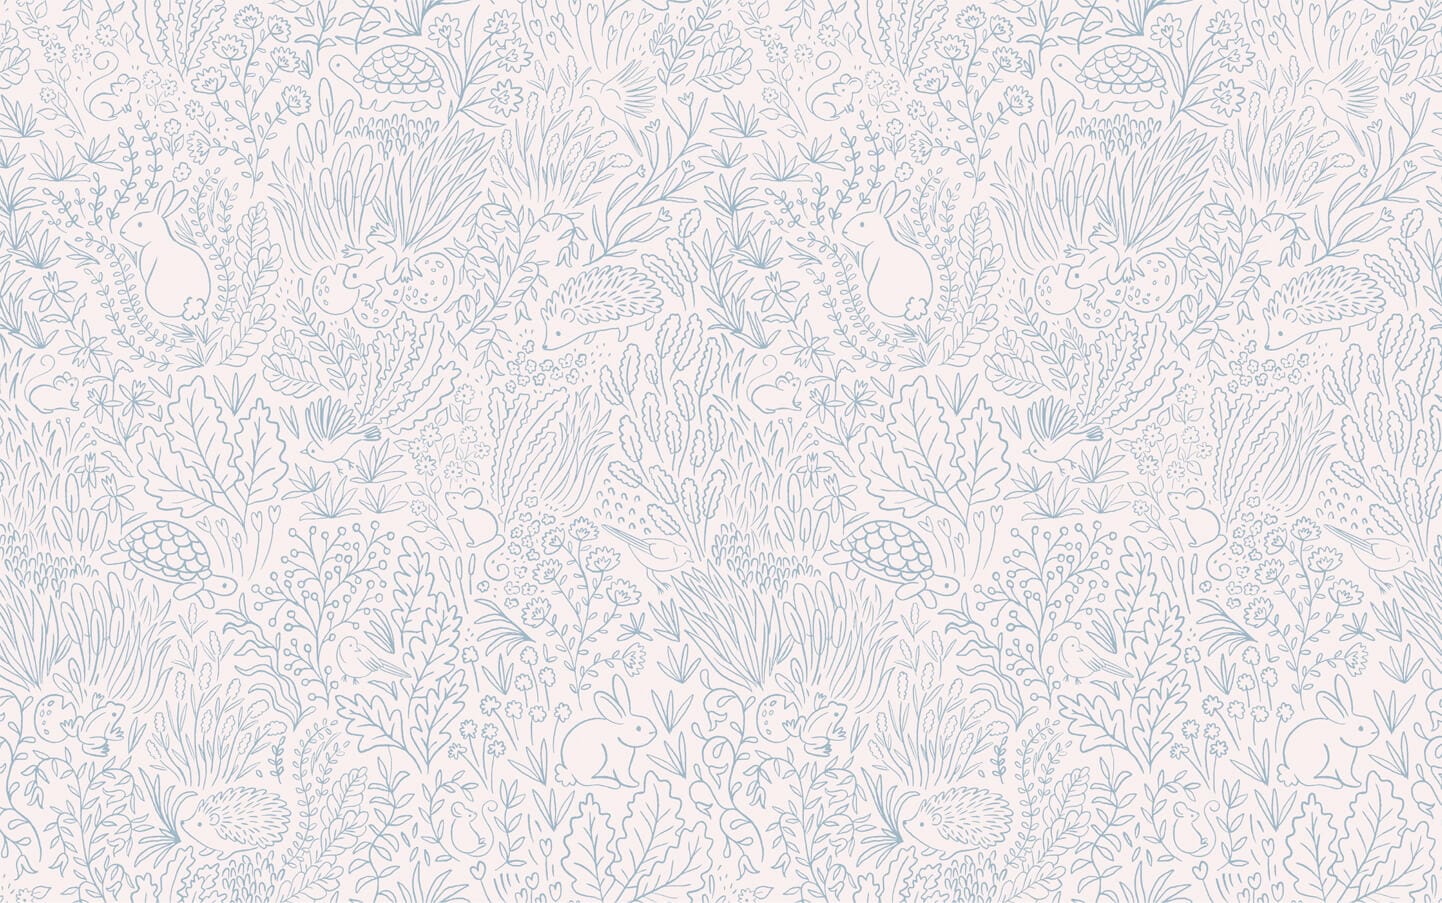 Wallpaper of blue line work animals and florals such as rabbits, hedgehogs, frogs, tortoise, mice and birds.